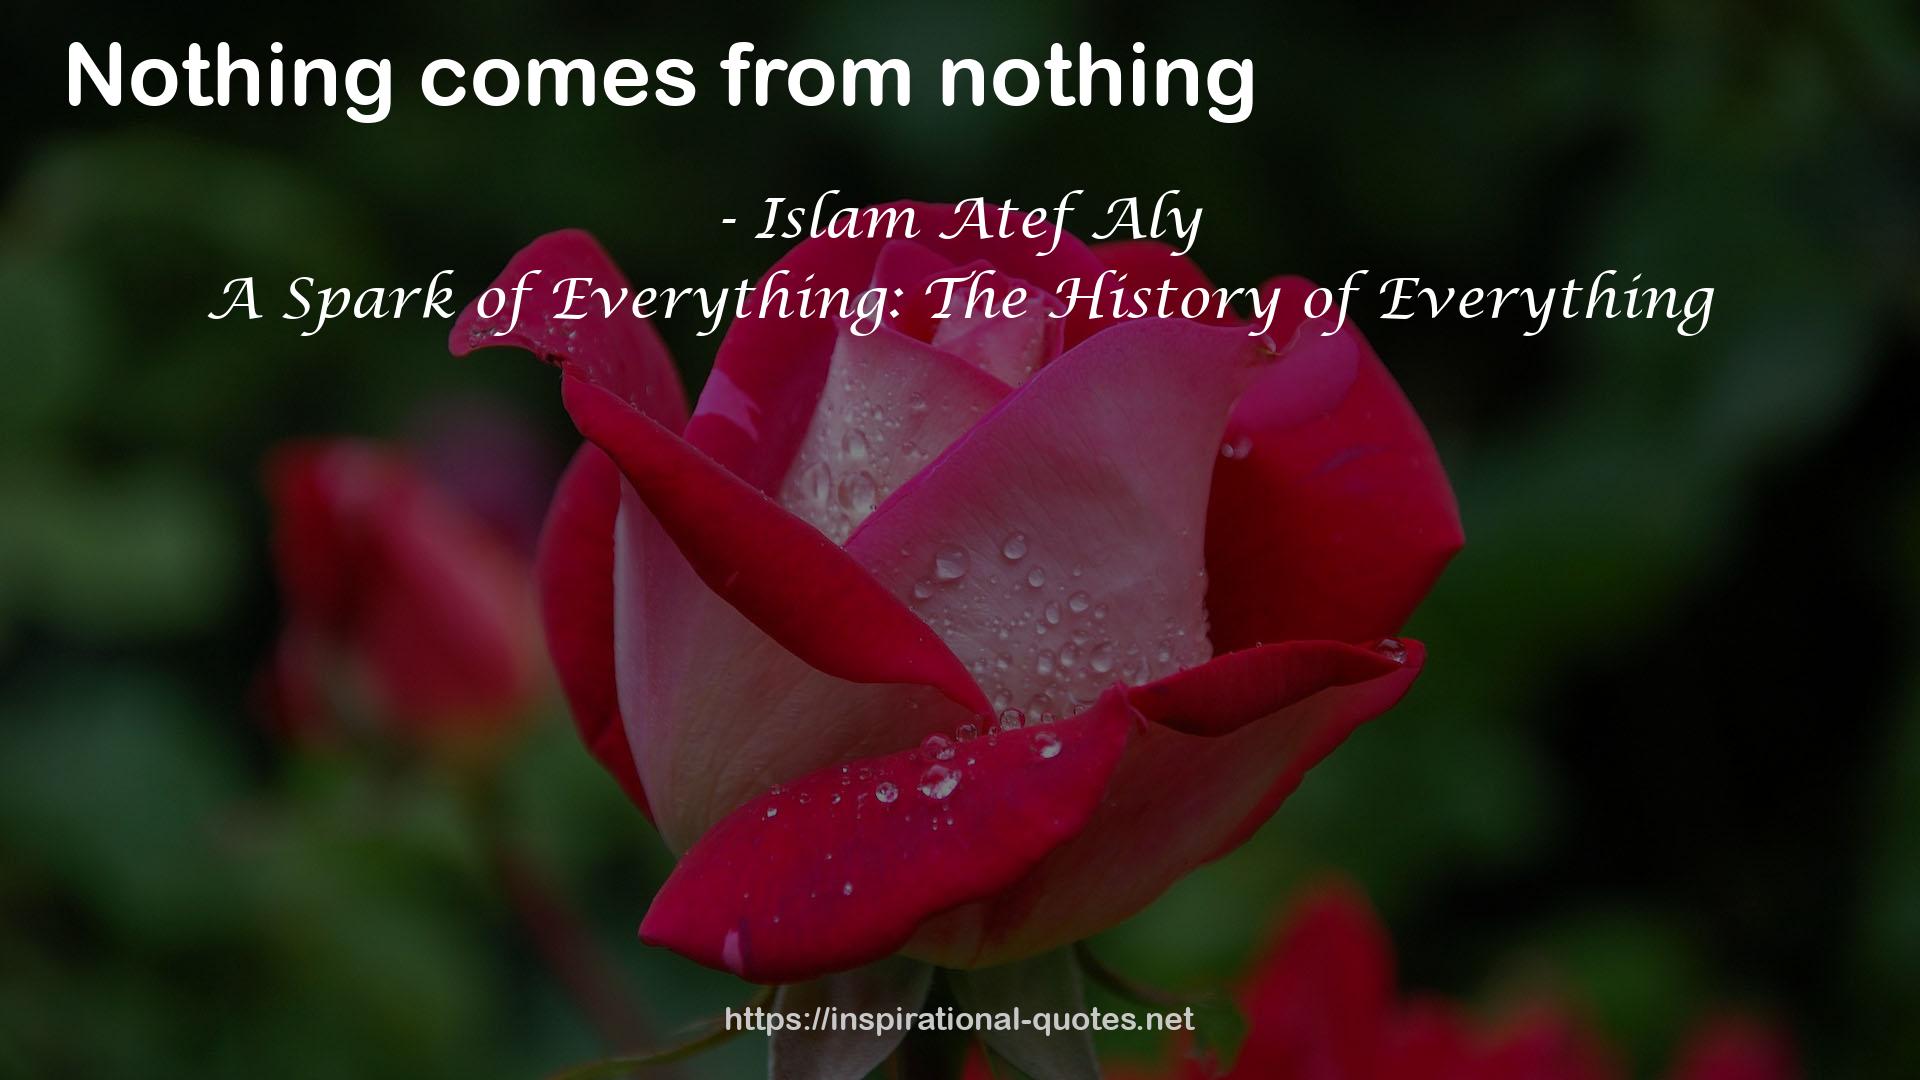 A Spark of Everything: The History of Everything QUOTES